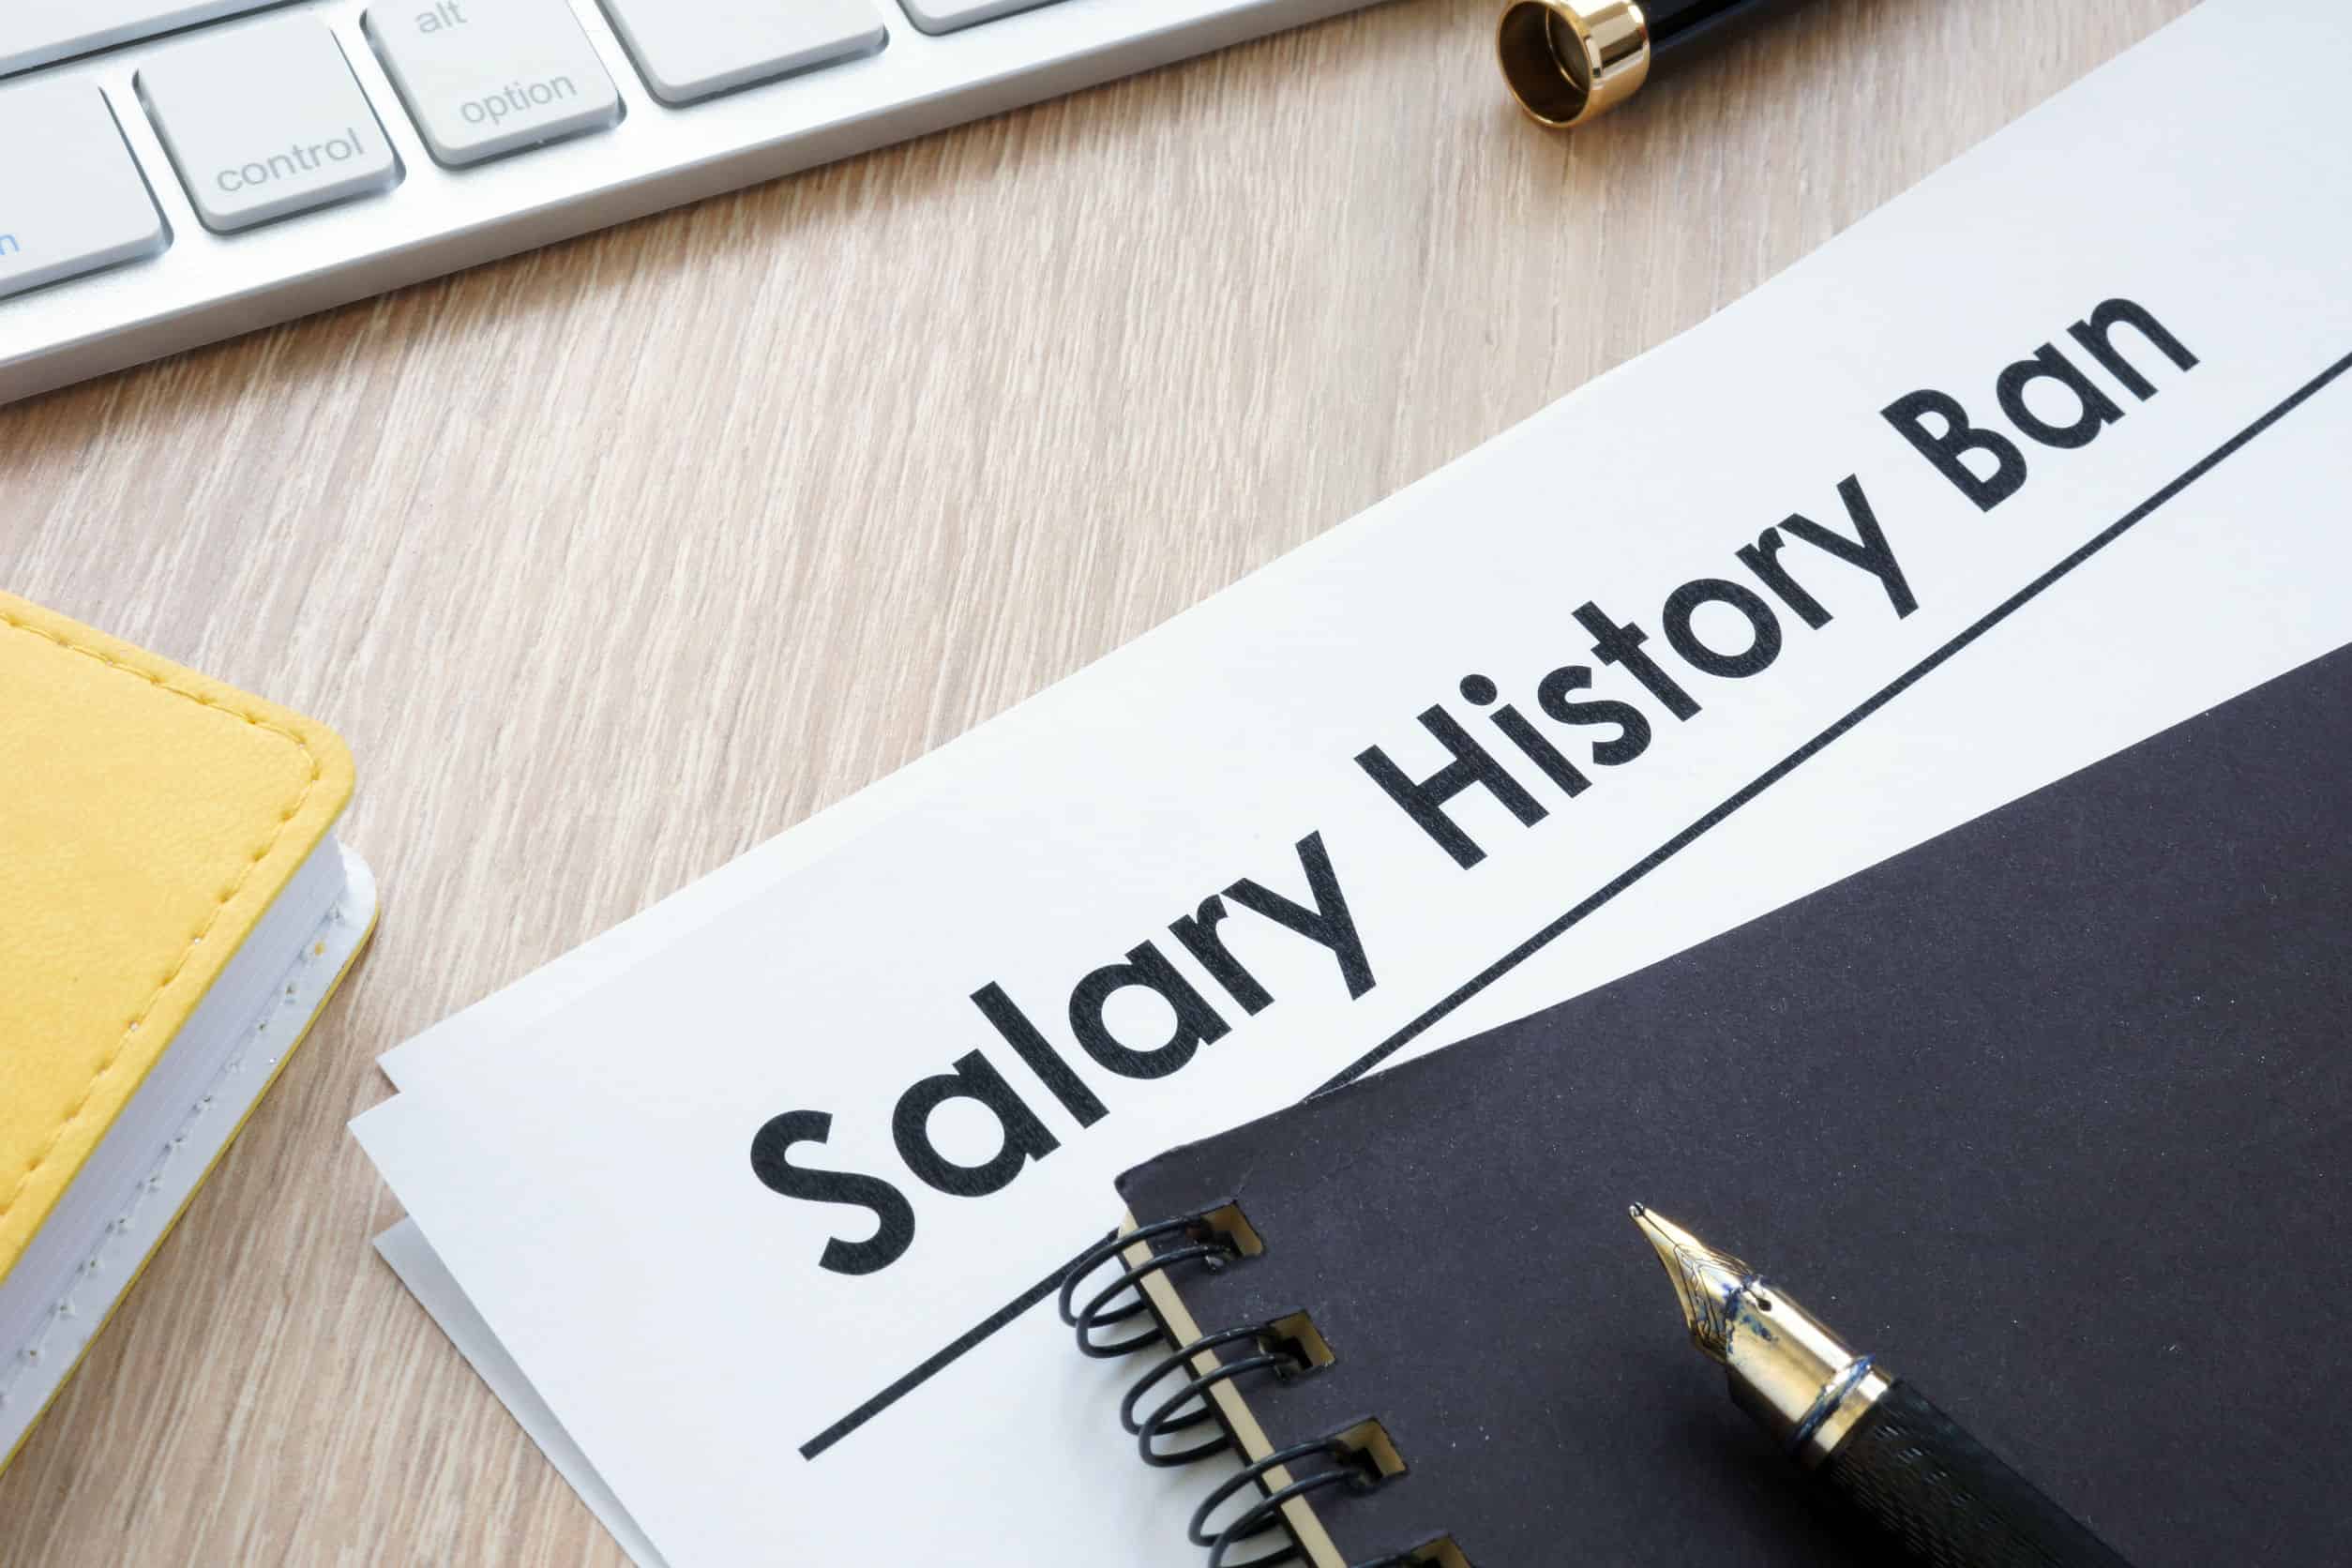 What Employers in the U.S. Need to Understand about Salary History Bans